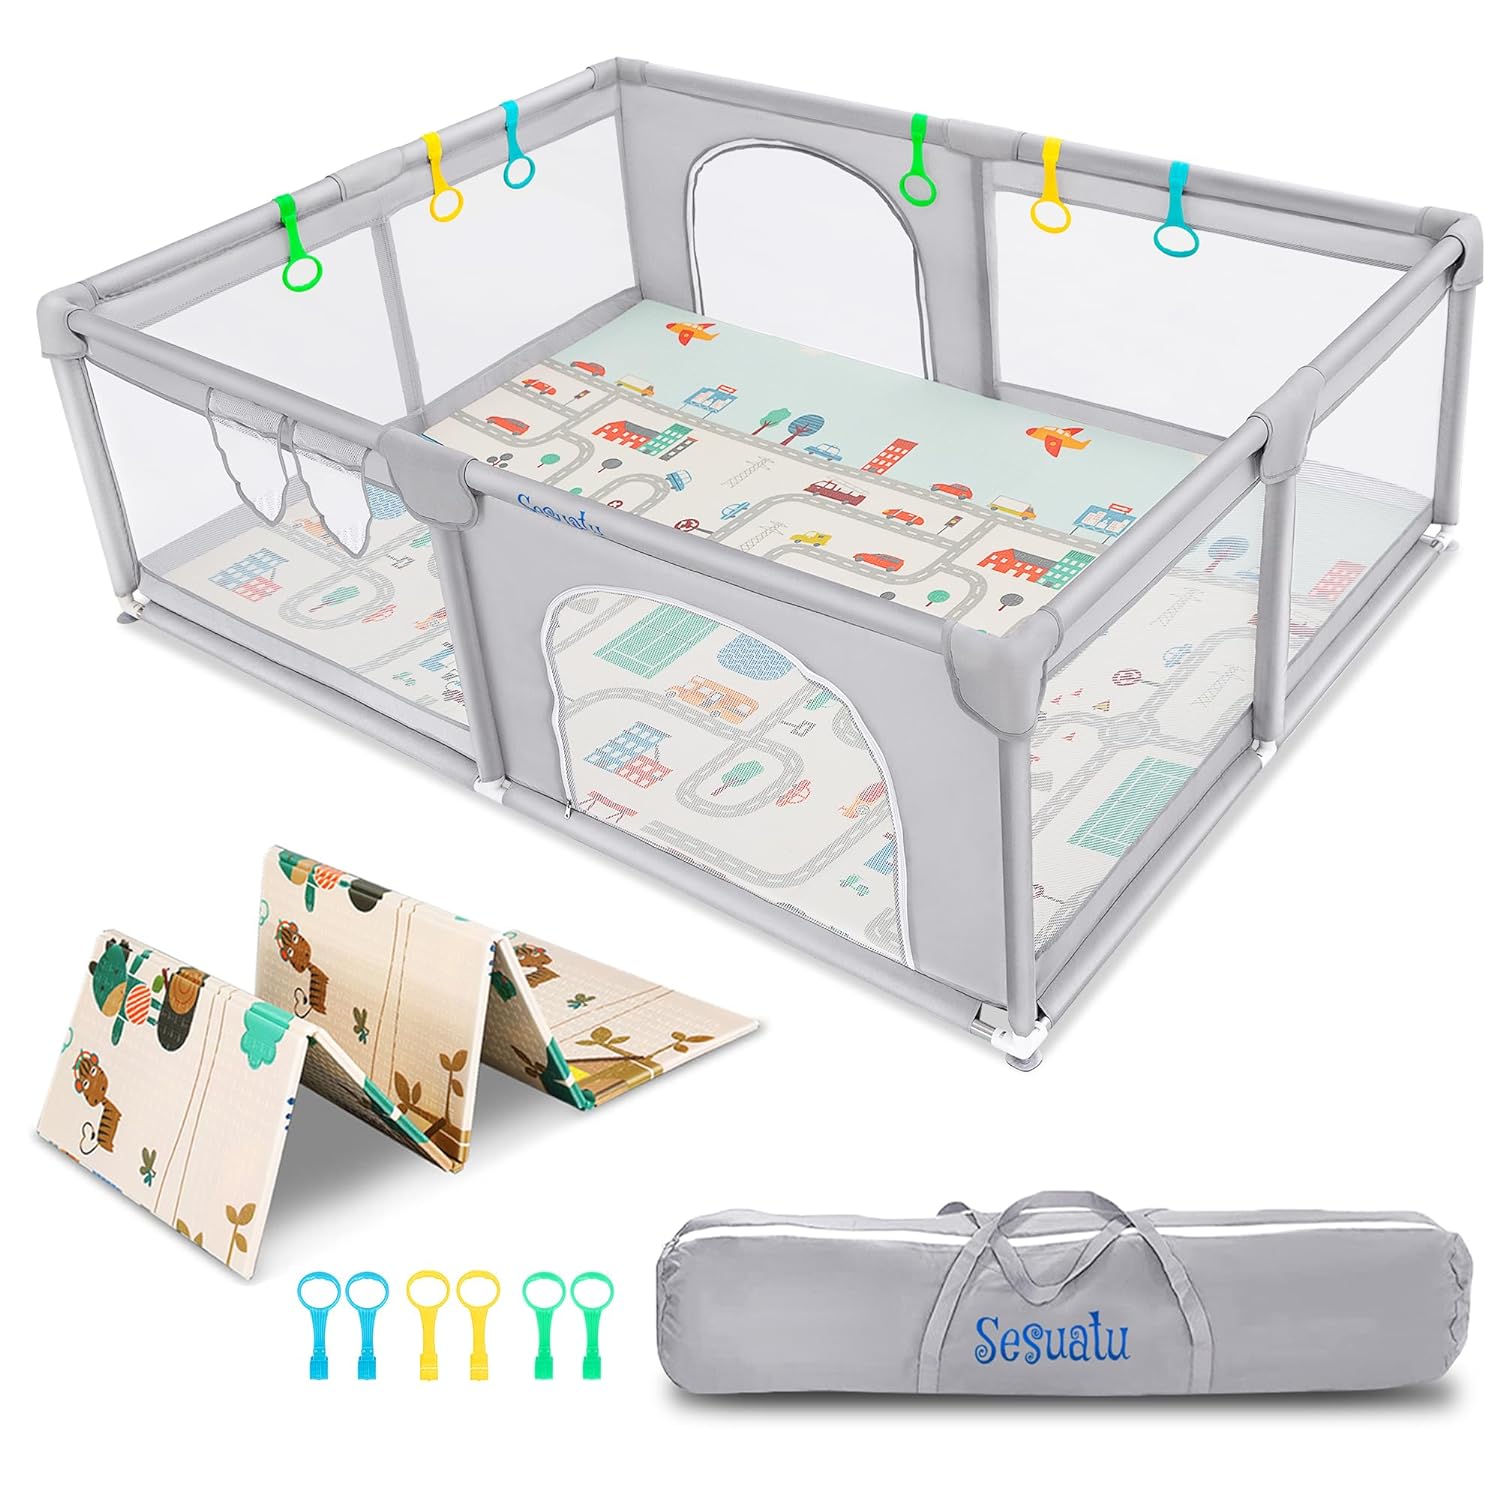 Baby Playpen with Mat, 79"x59" Extra Large Playpen for Babies and Toddlers - $65